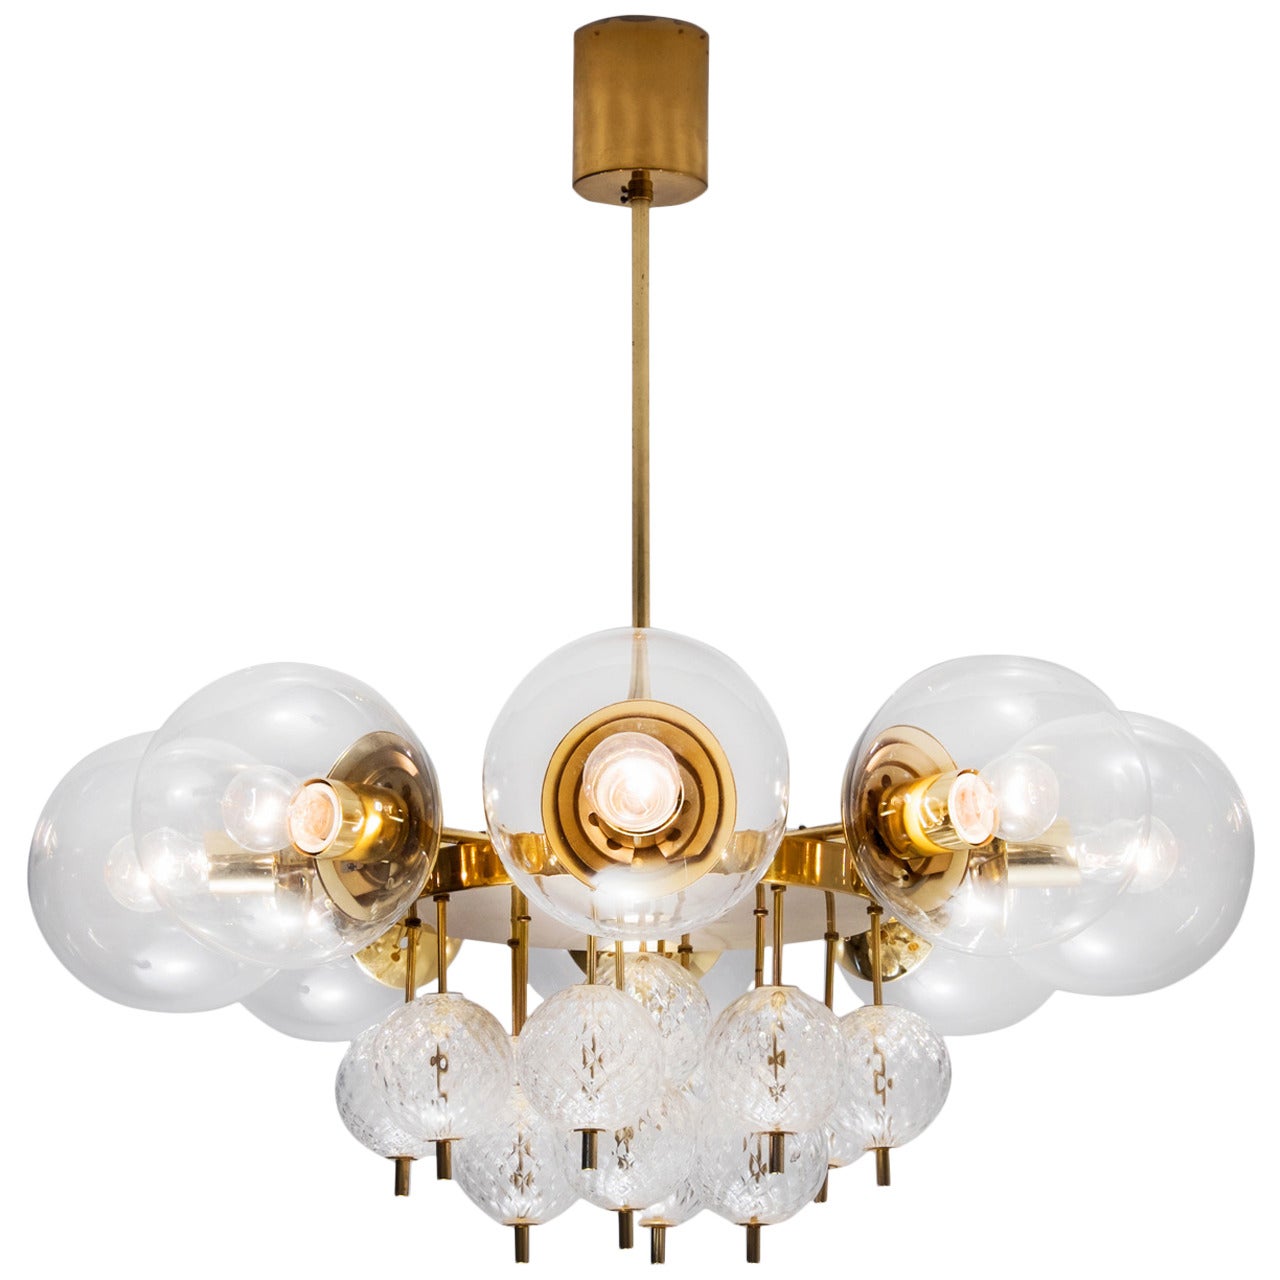 Large Chandelier with Brass and Glass Bulbs